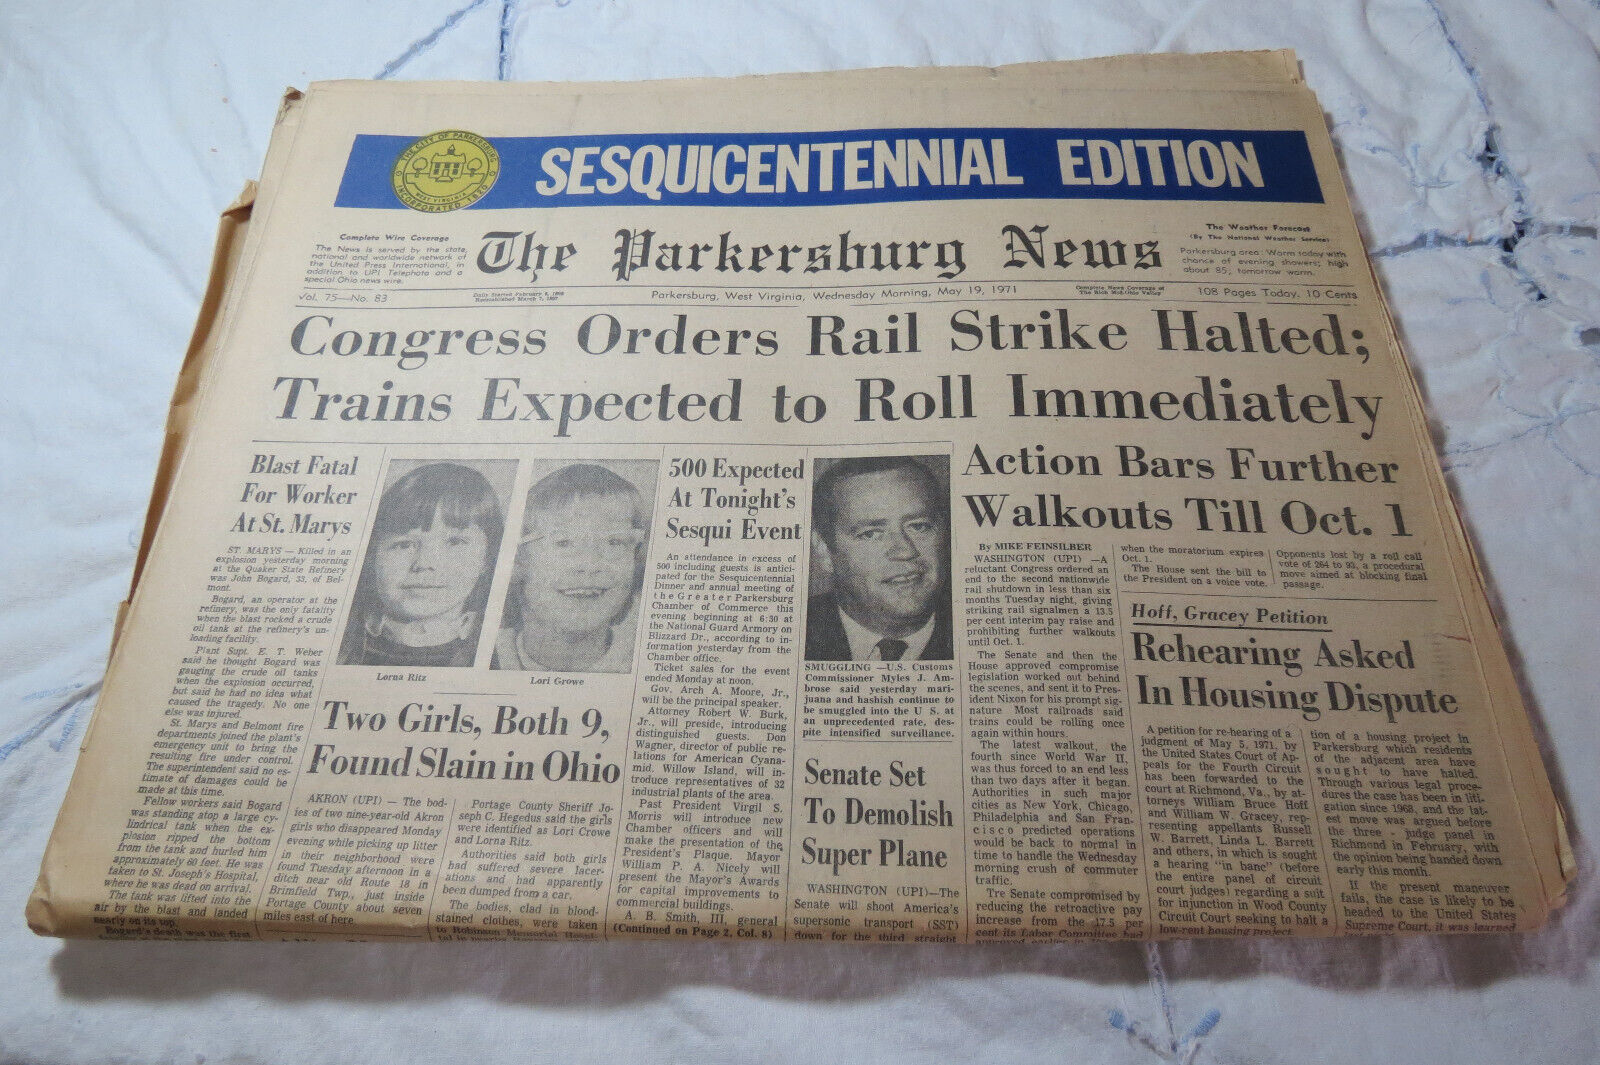 The Parkersburg News May 19, 1971 Sesquicentennial Edition  Quaker Explosion